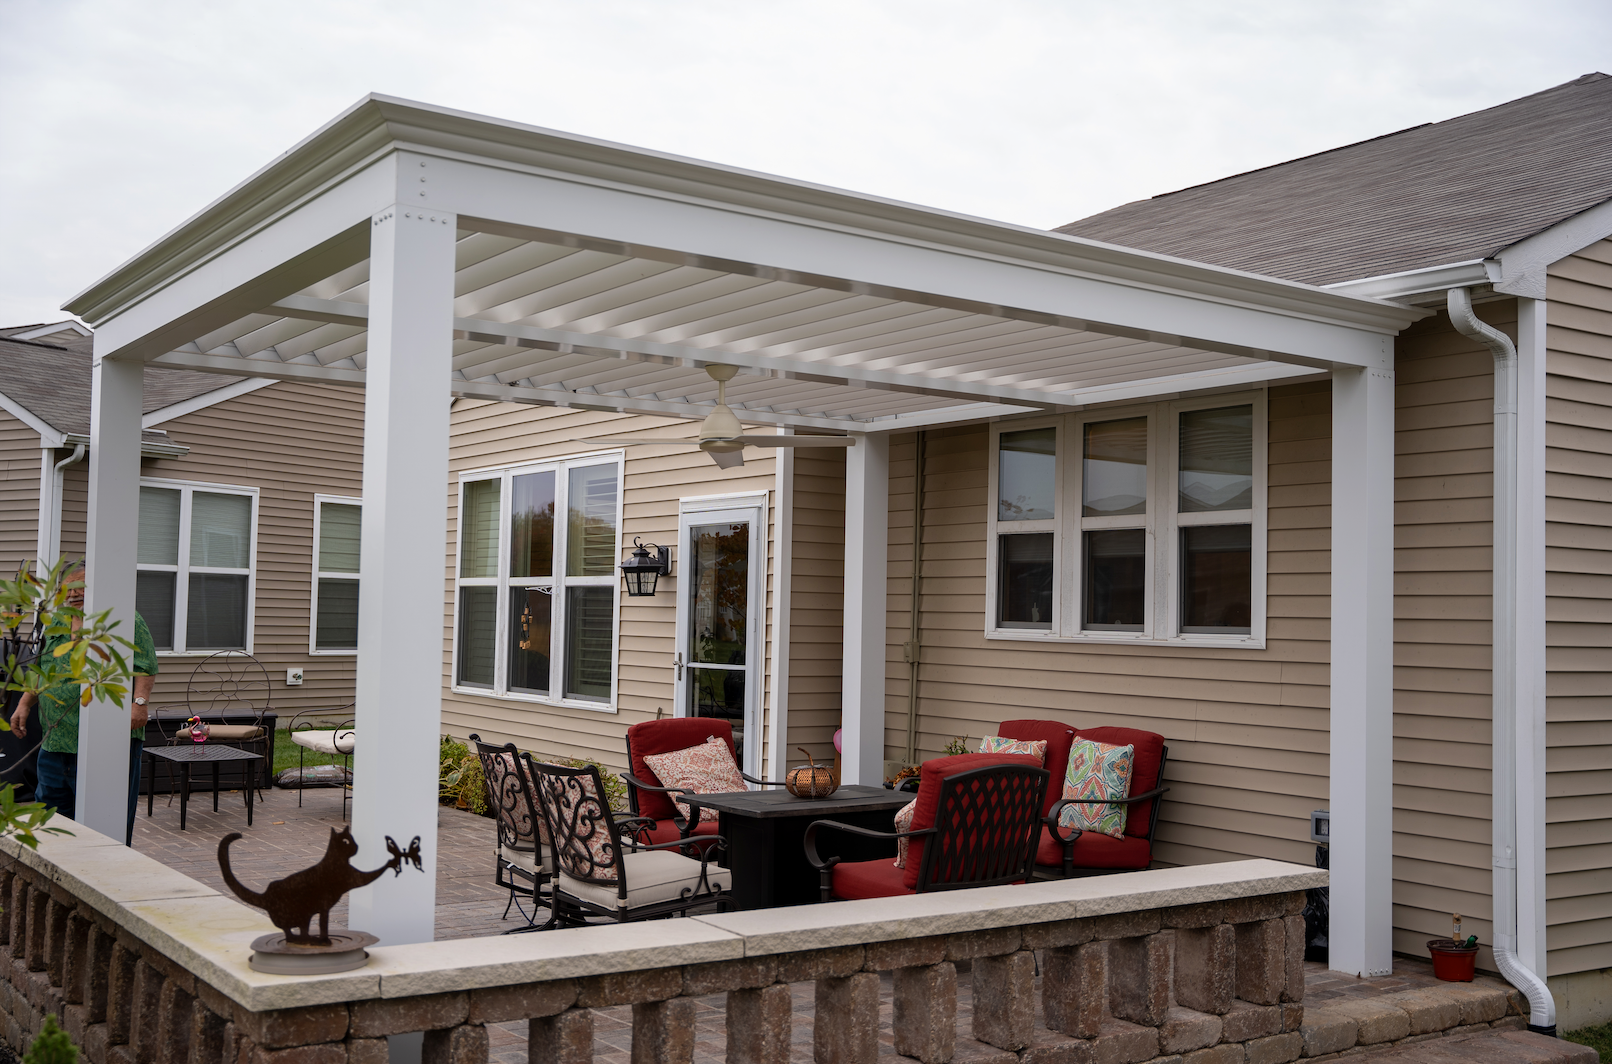 Pergola Kit Installed On Existing Patio To Provide Shade And Shelter